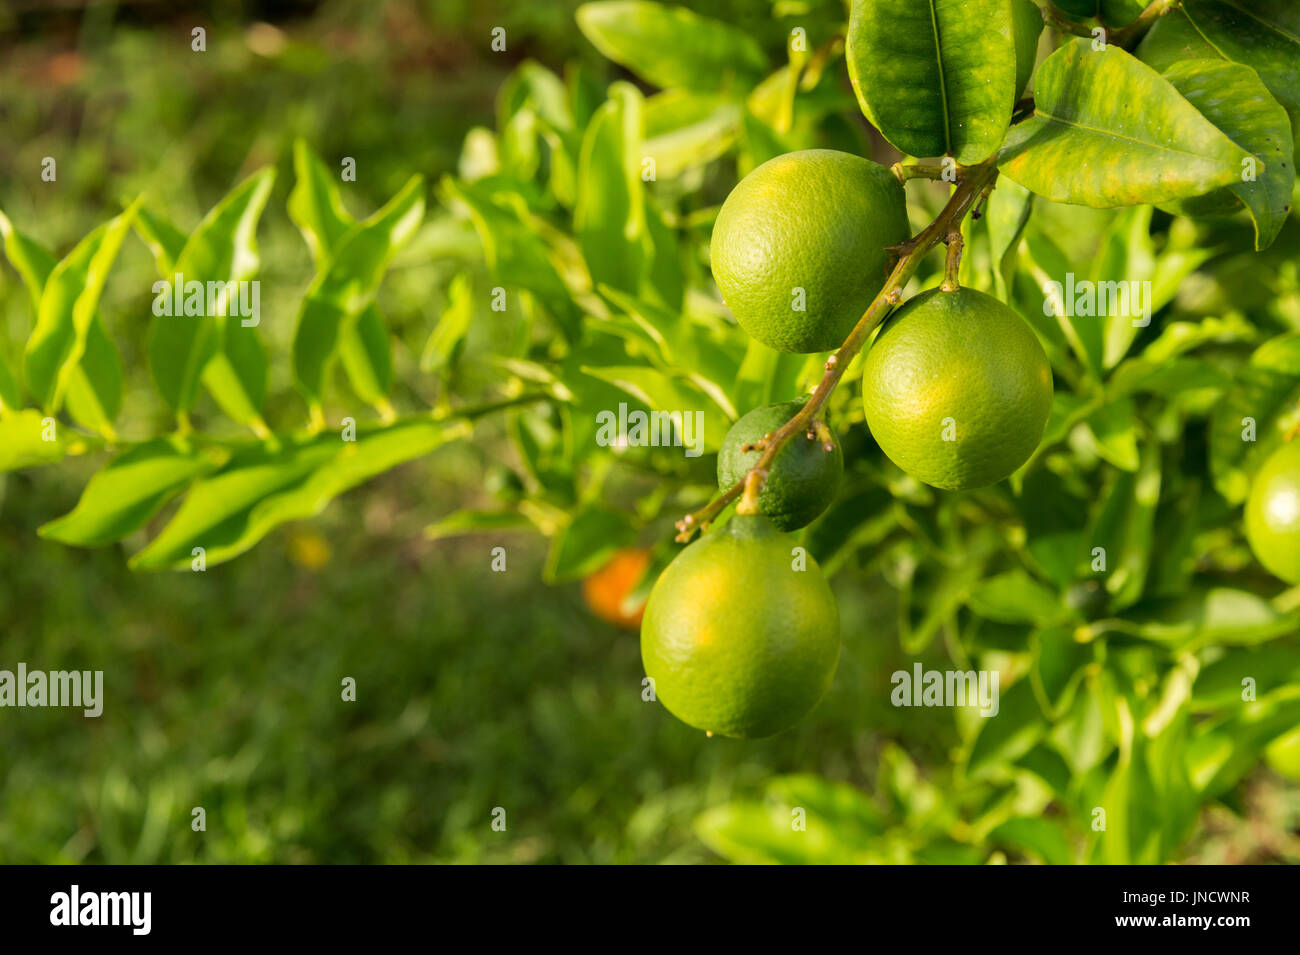 Green lemons growing on a lemon tree in Martinique Stock Photo